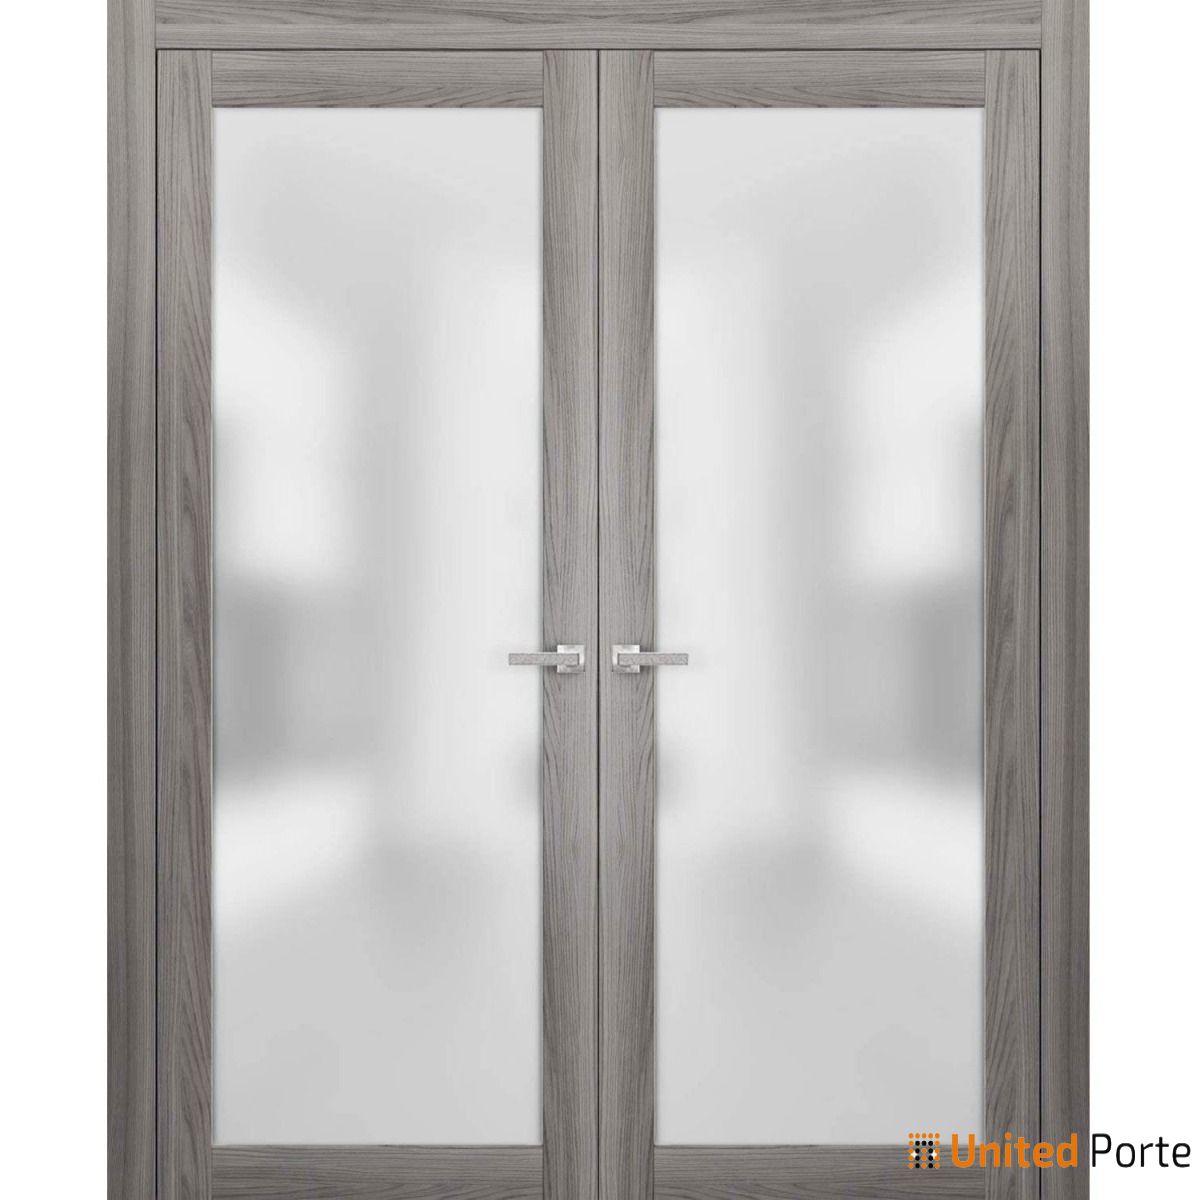 Design Ideas: Frosted Glass Doors For Your Entrance - Fenesta